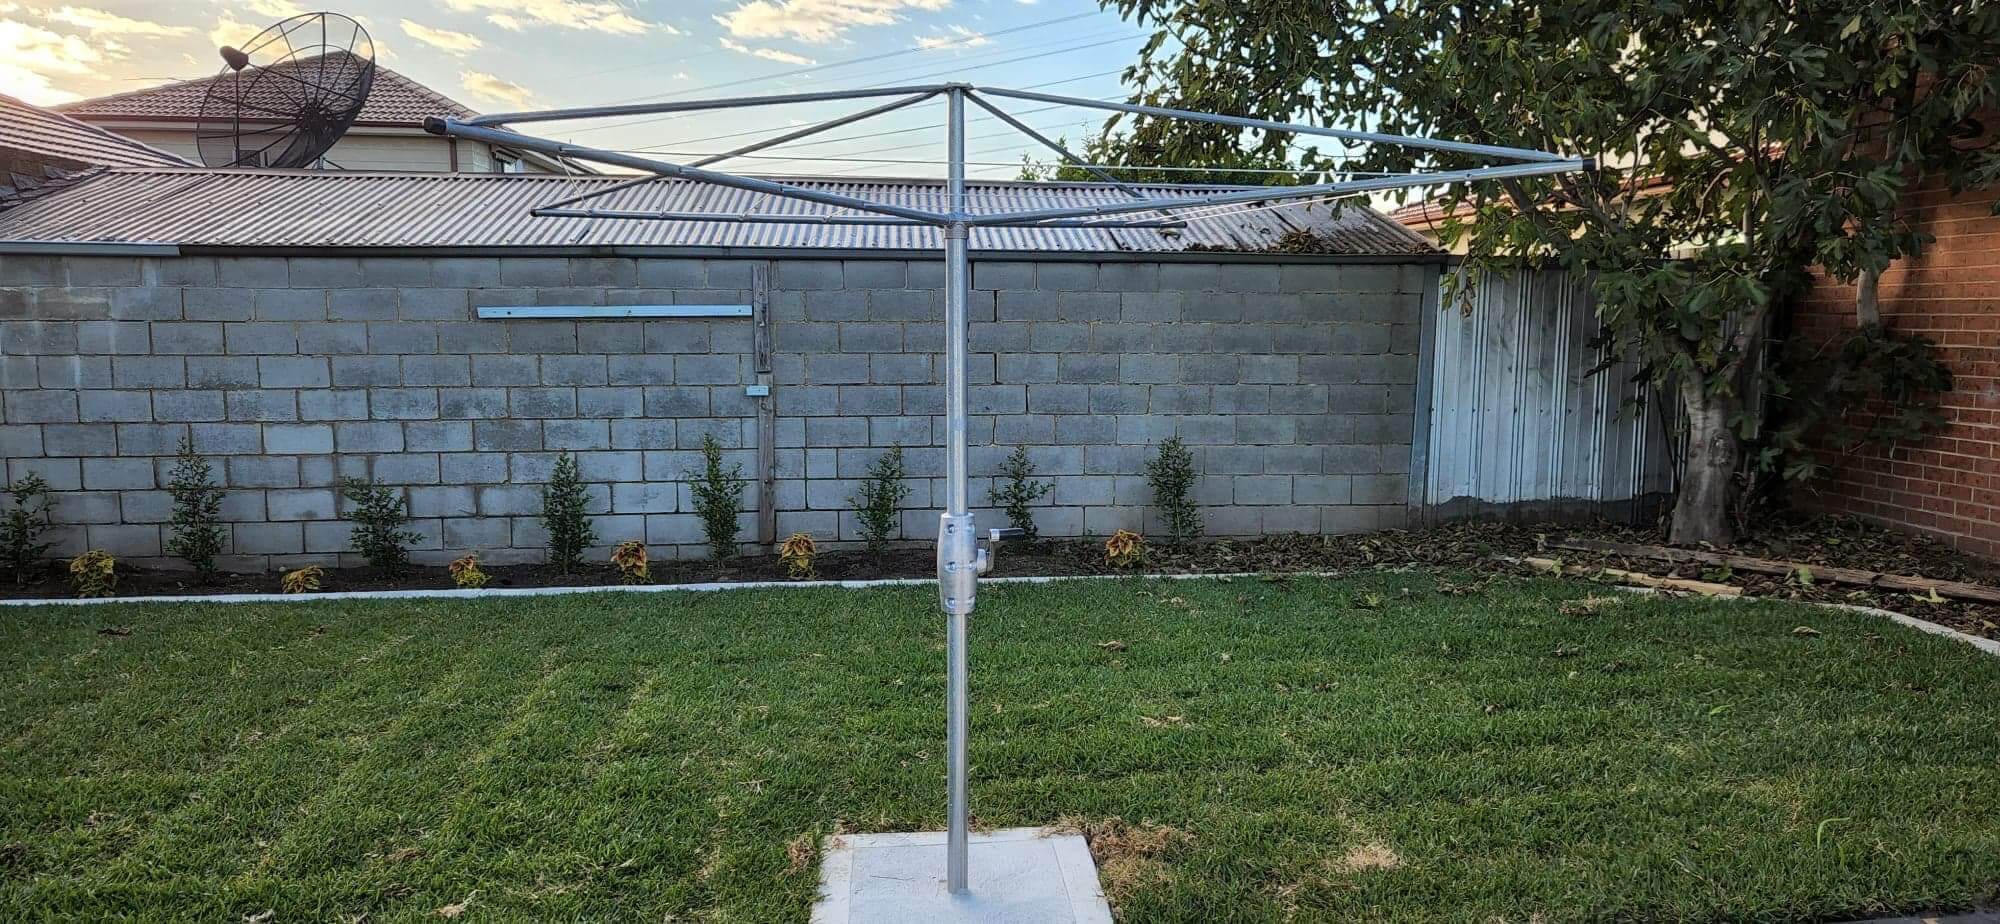 Clothesline installation of Austral super 5 rotary in Melbourne, Australia.